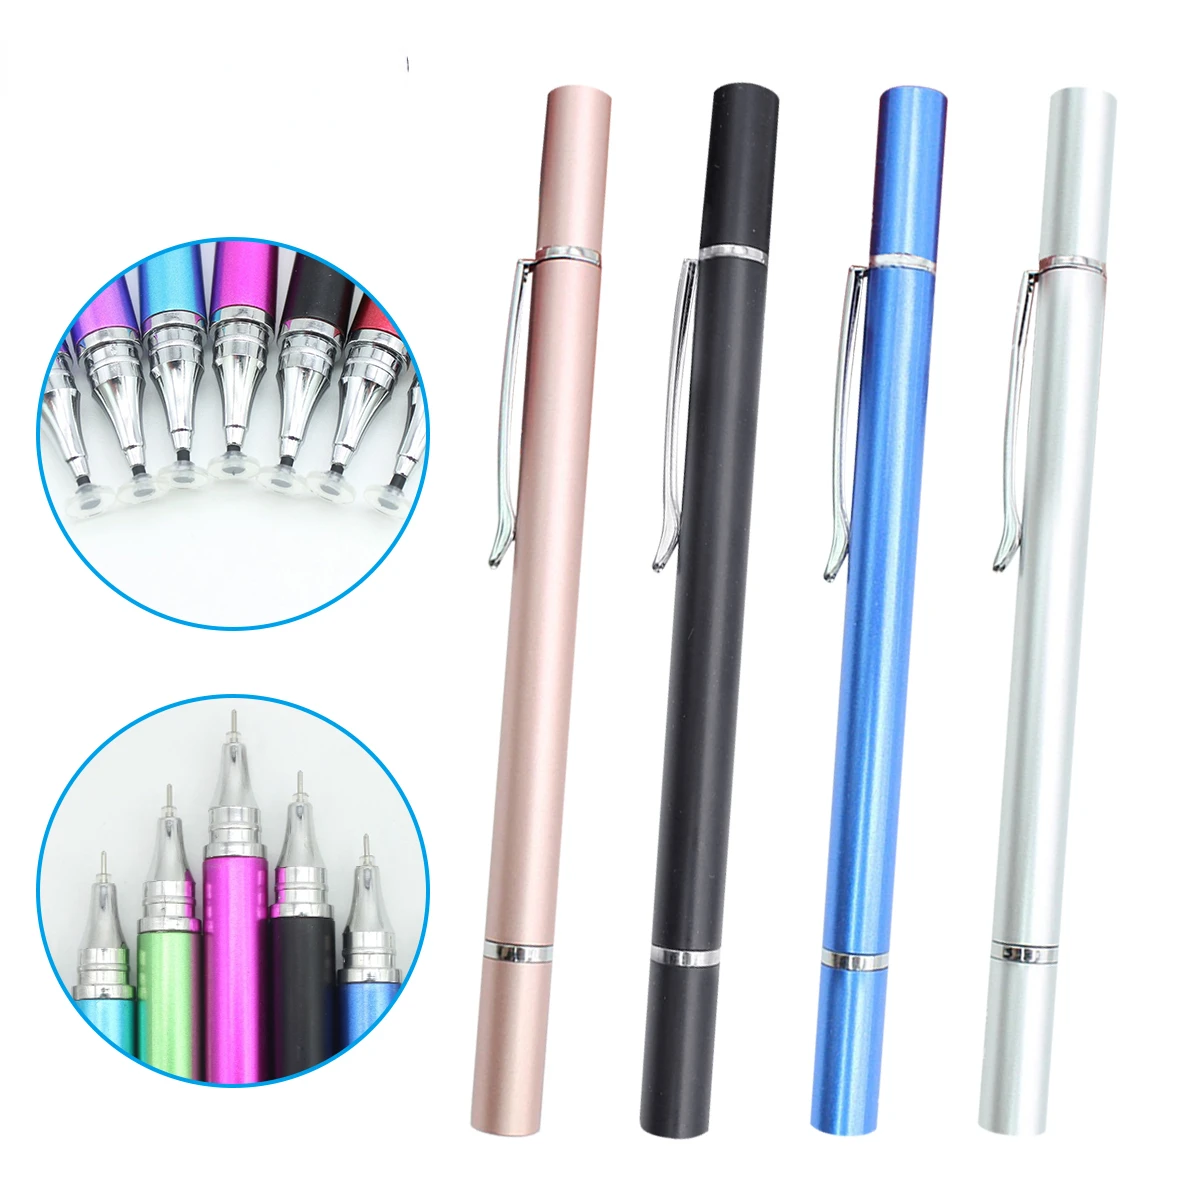 

2022NEW Pen Mobile Phone Strong Compatibility Touch Screen Stylus Handwriting Pen Suitable For iPad mini 1 2 3 4 5 Mobile Phone